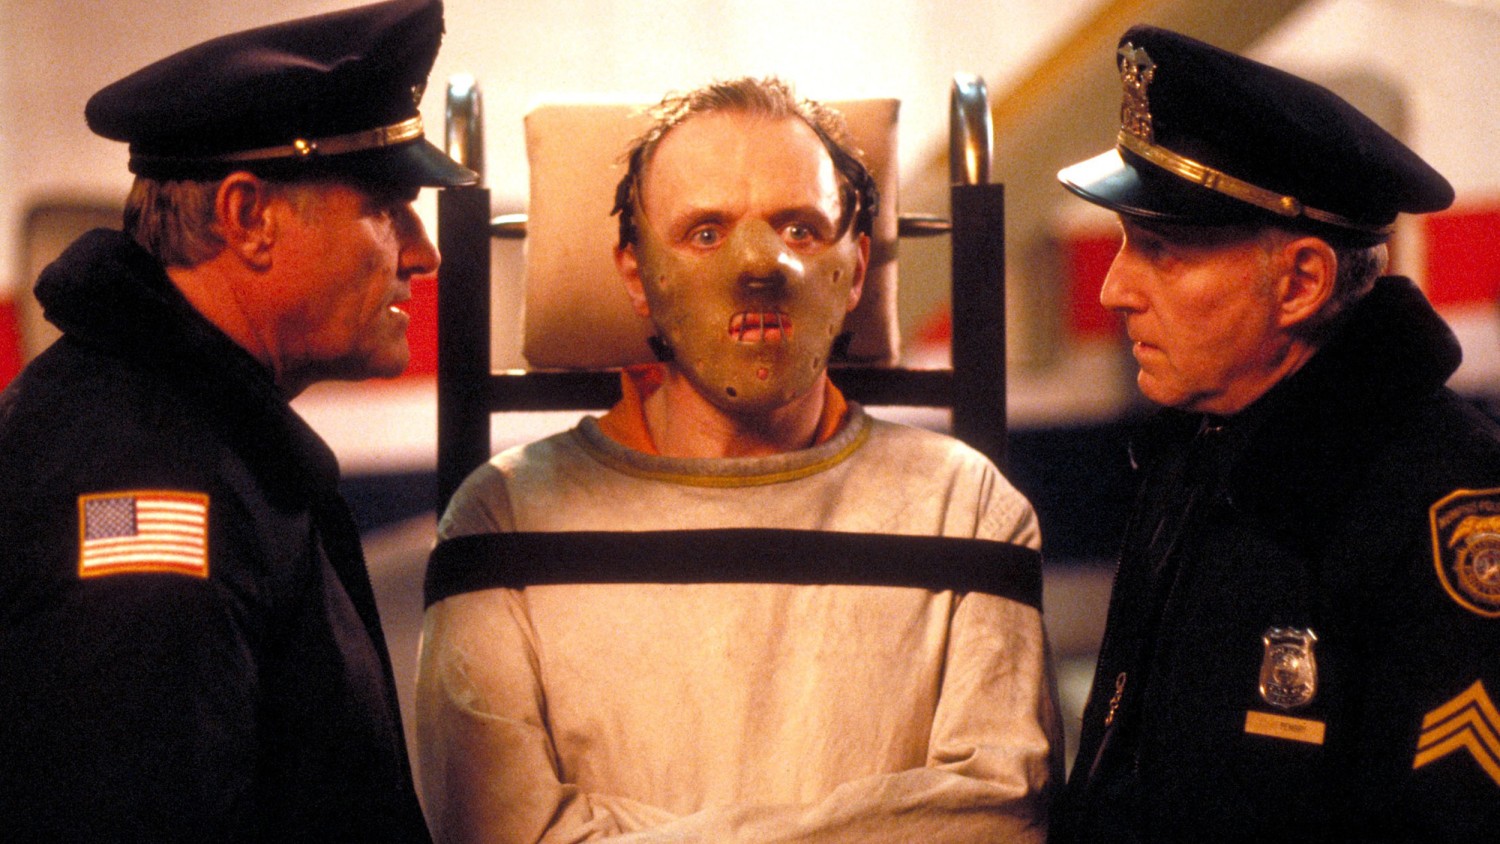 Silence of the Lambs' turns 25: See 8 facts you may not know about the film